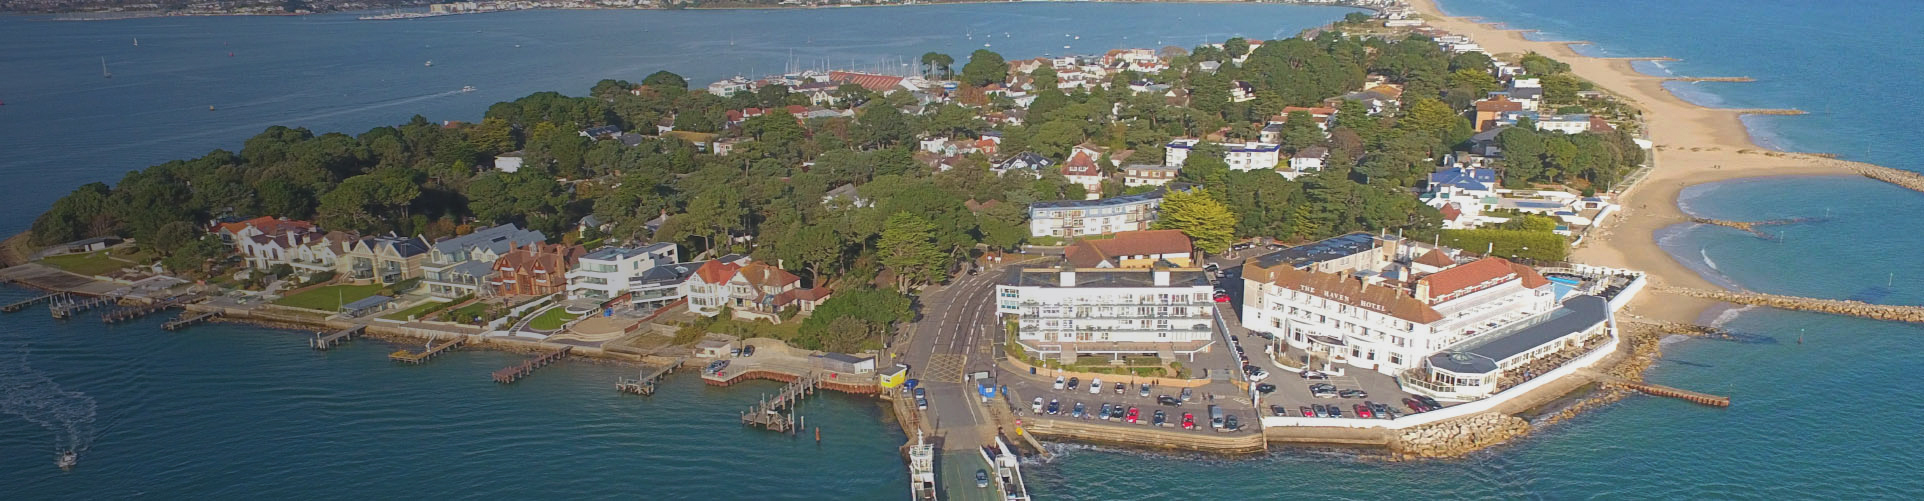 Aerial photo of Heaven Hotel and Ferry, Sandbanks, Poole